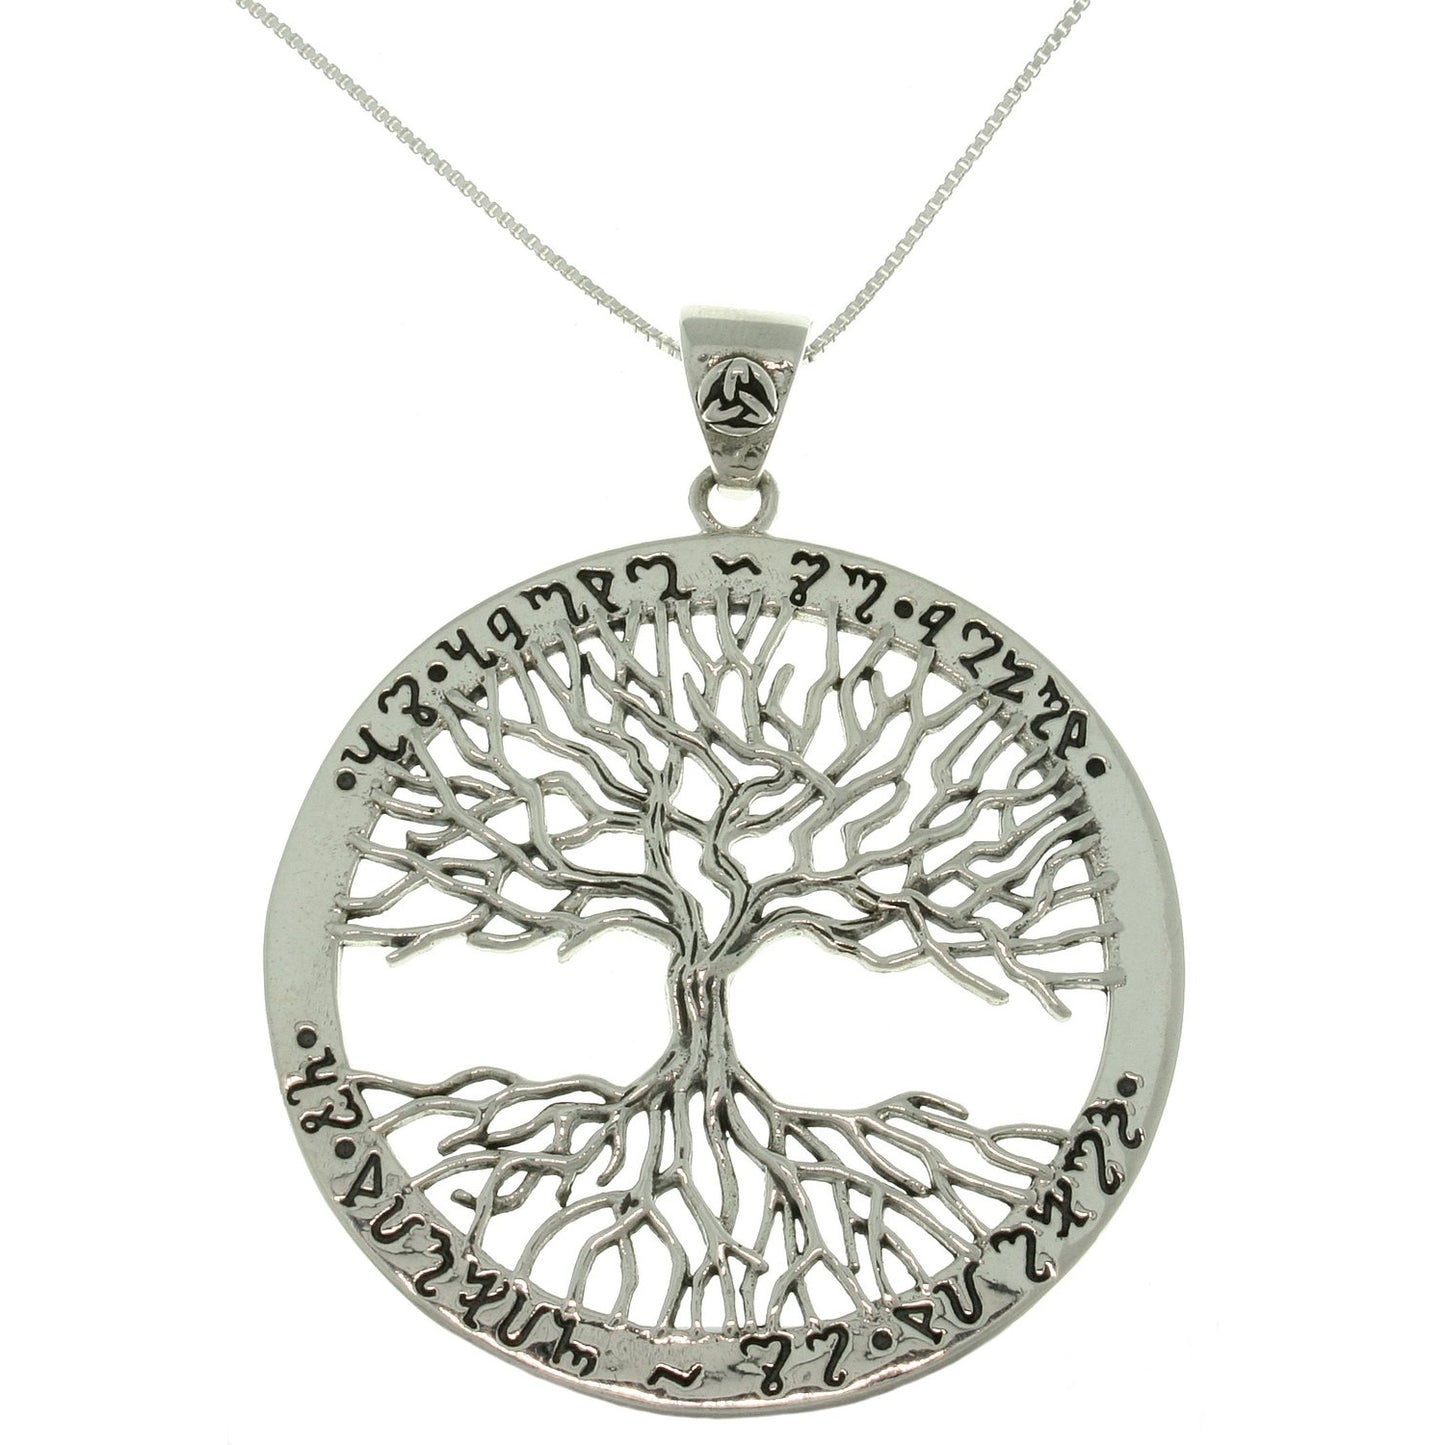 Wiccan Twisted Tree of Life Amulet Sterling Silver Pendant - Silver Insanity